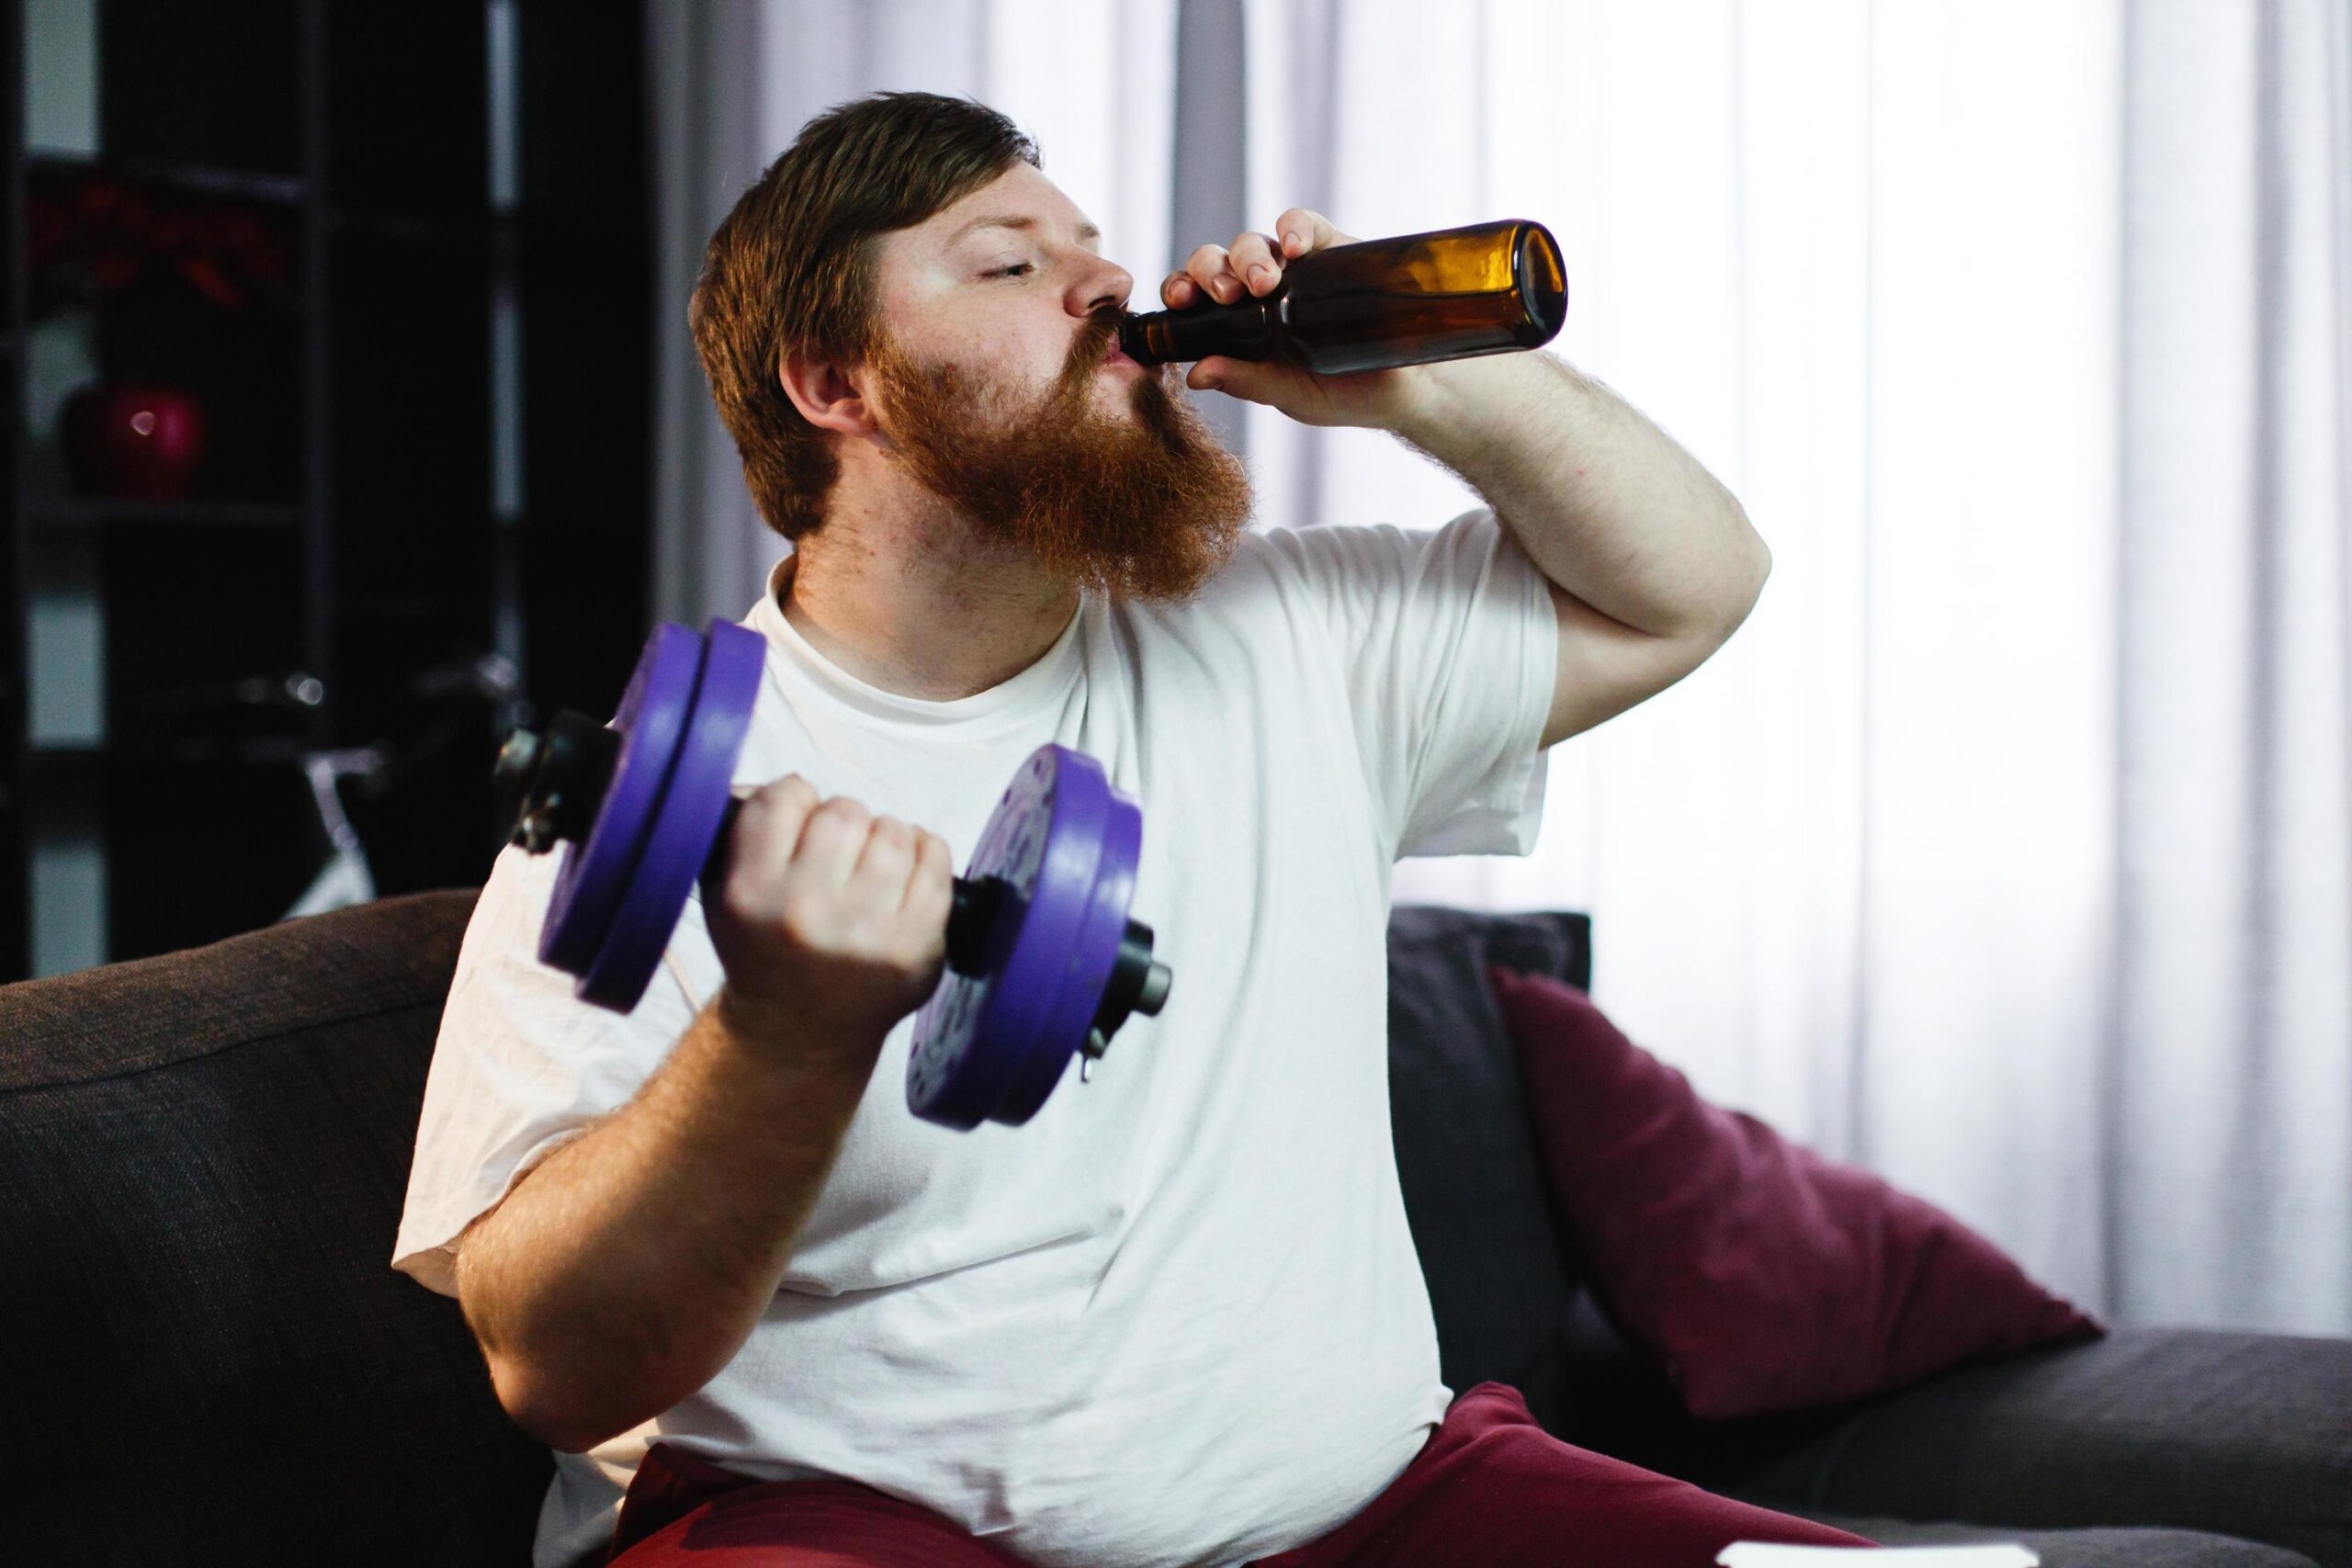 man-drinking-a-beer-while-lifting-weights-free-photo-scaled.jpg